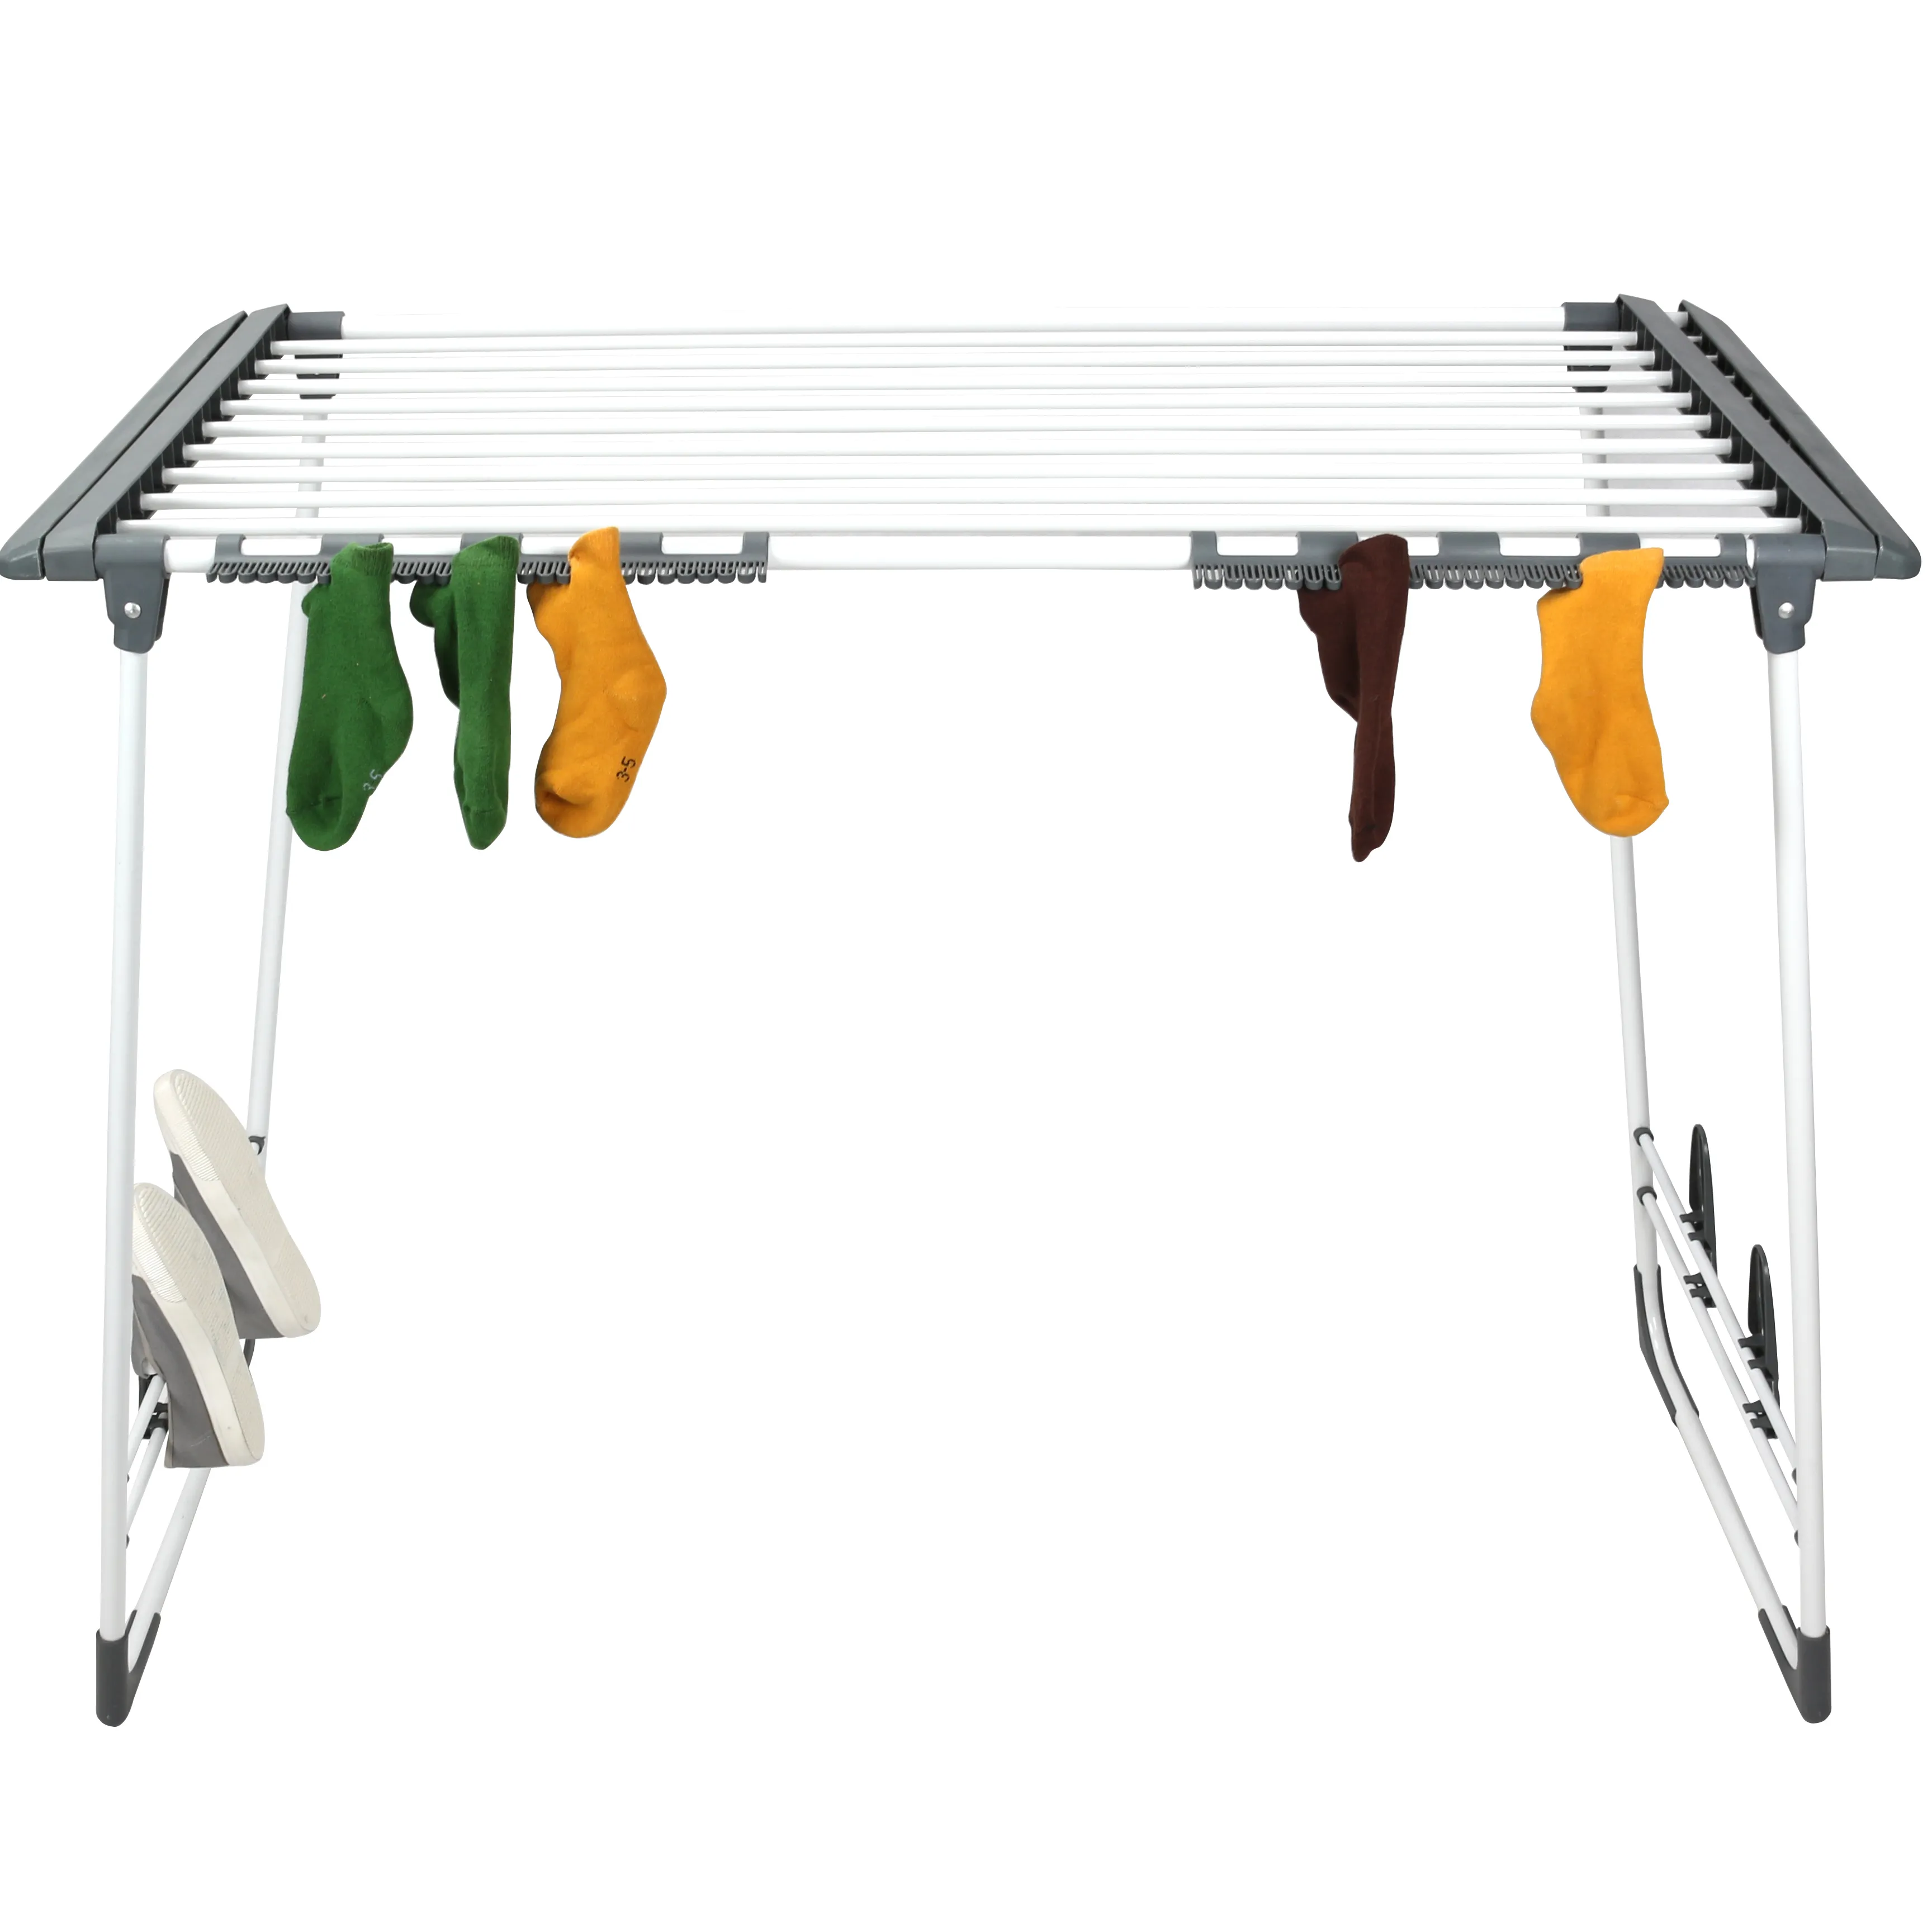 Free standing extendable clothes drying rack